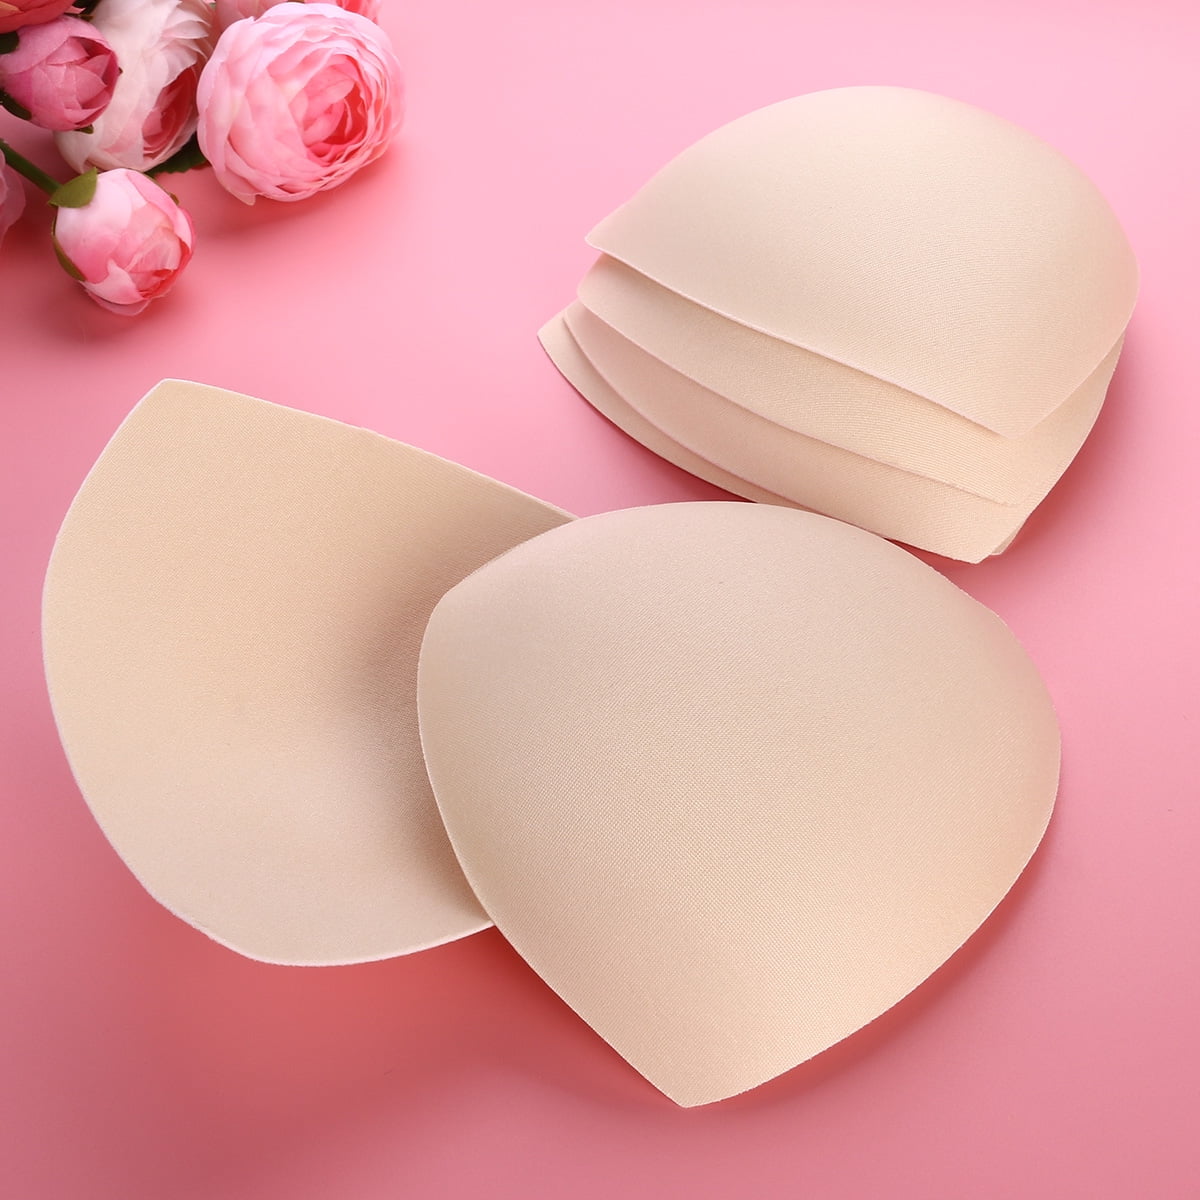 Bra Pads Inserts Latex Bras Inserts Removable for Women's Sports Cups Bra or Swimsuit Insert 